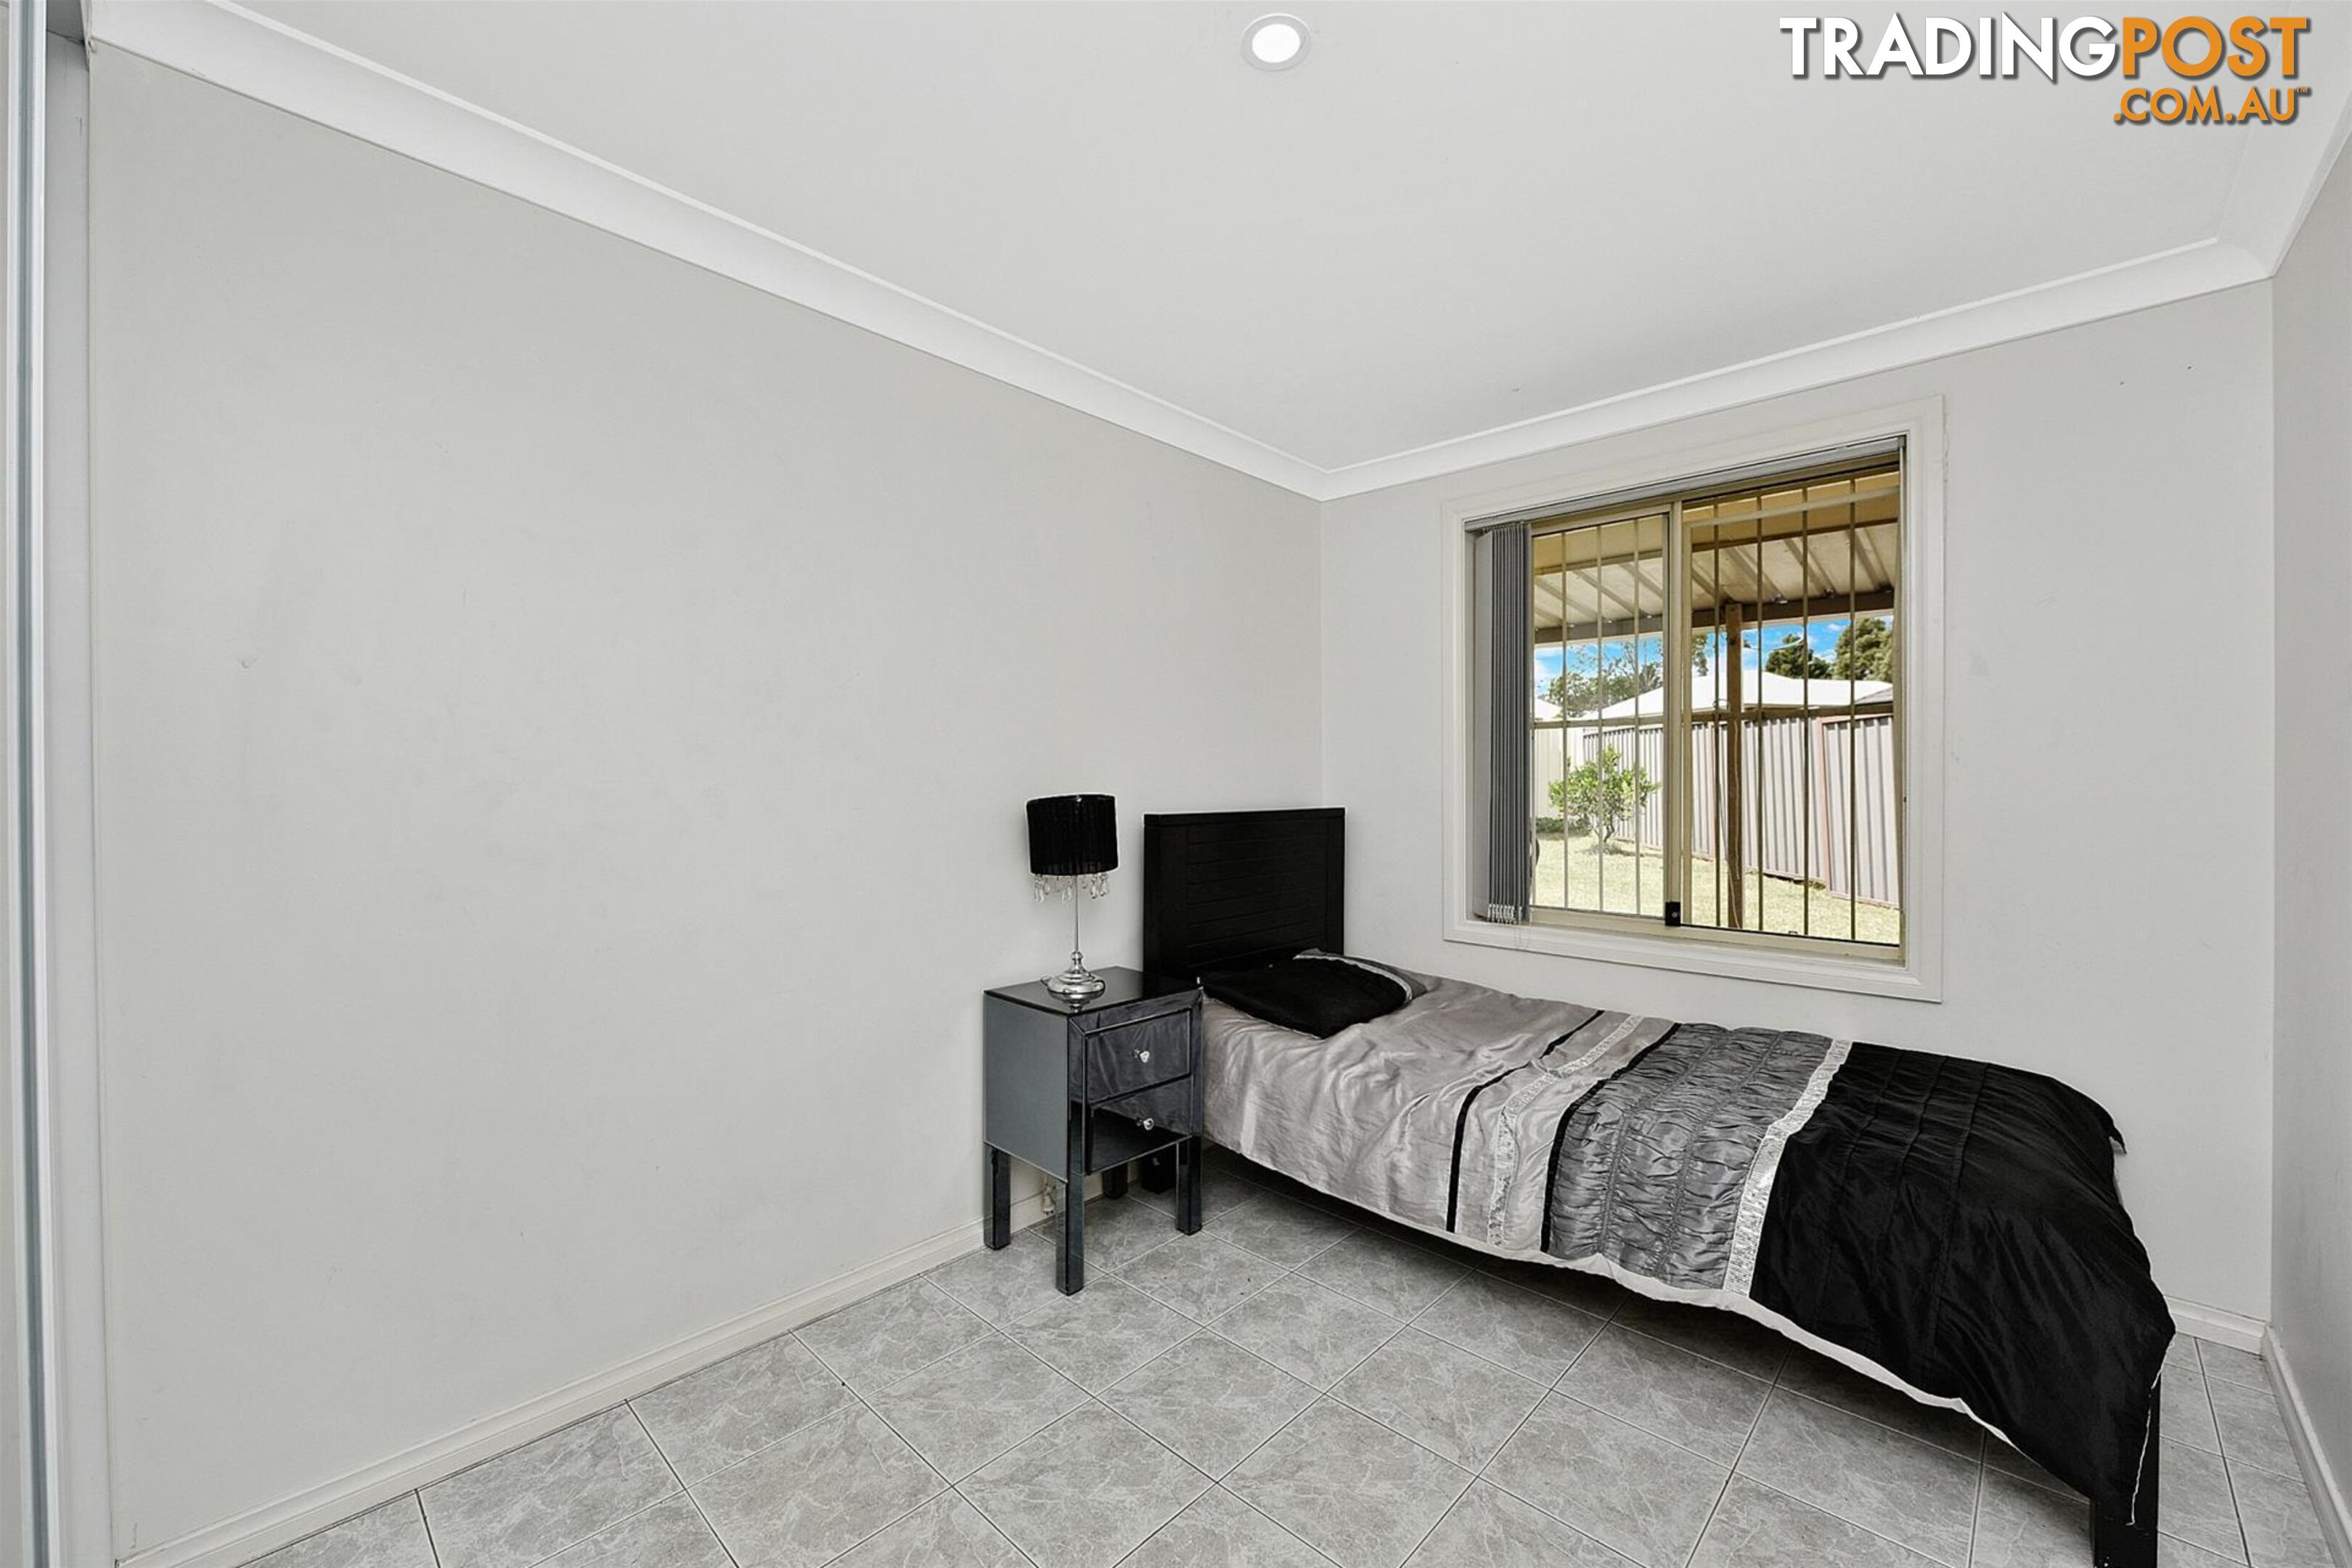 3/126 Orchard Road Chester Hill NSW 2162